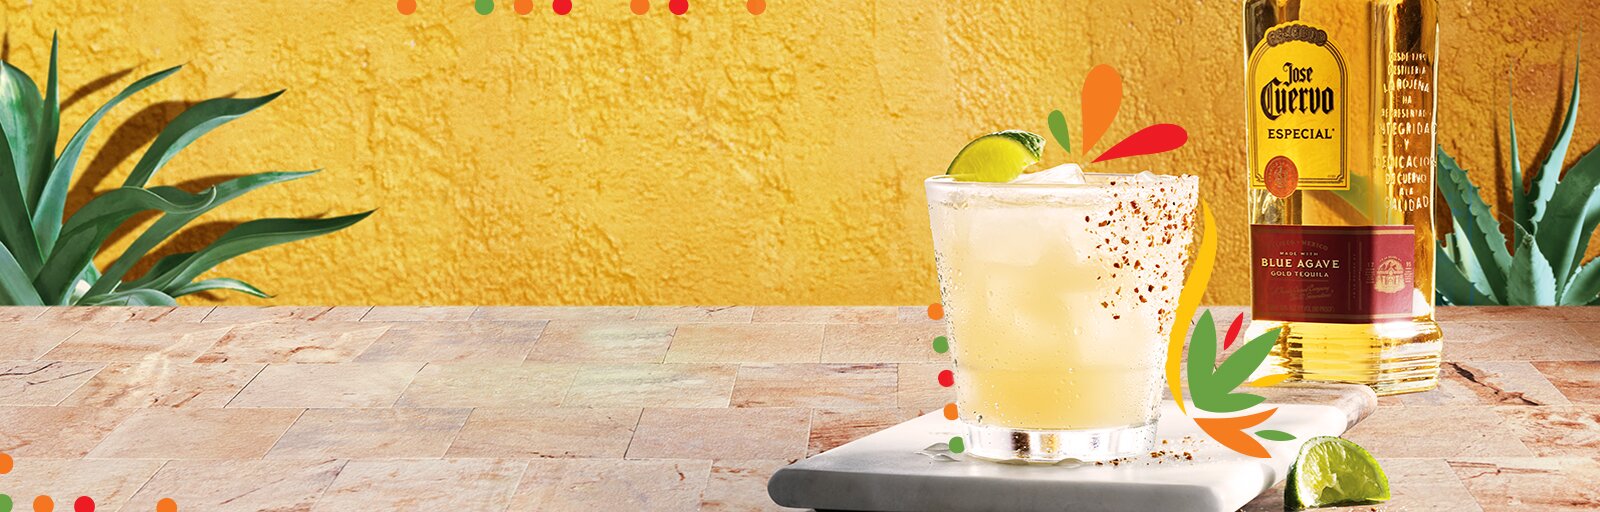 Chili's August Margarita of the Month, the Tequila Trifecta, on a surface with a yellow background and agave plants 